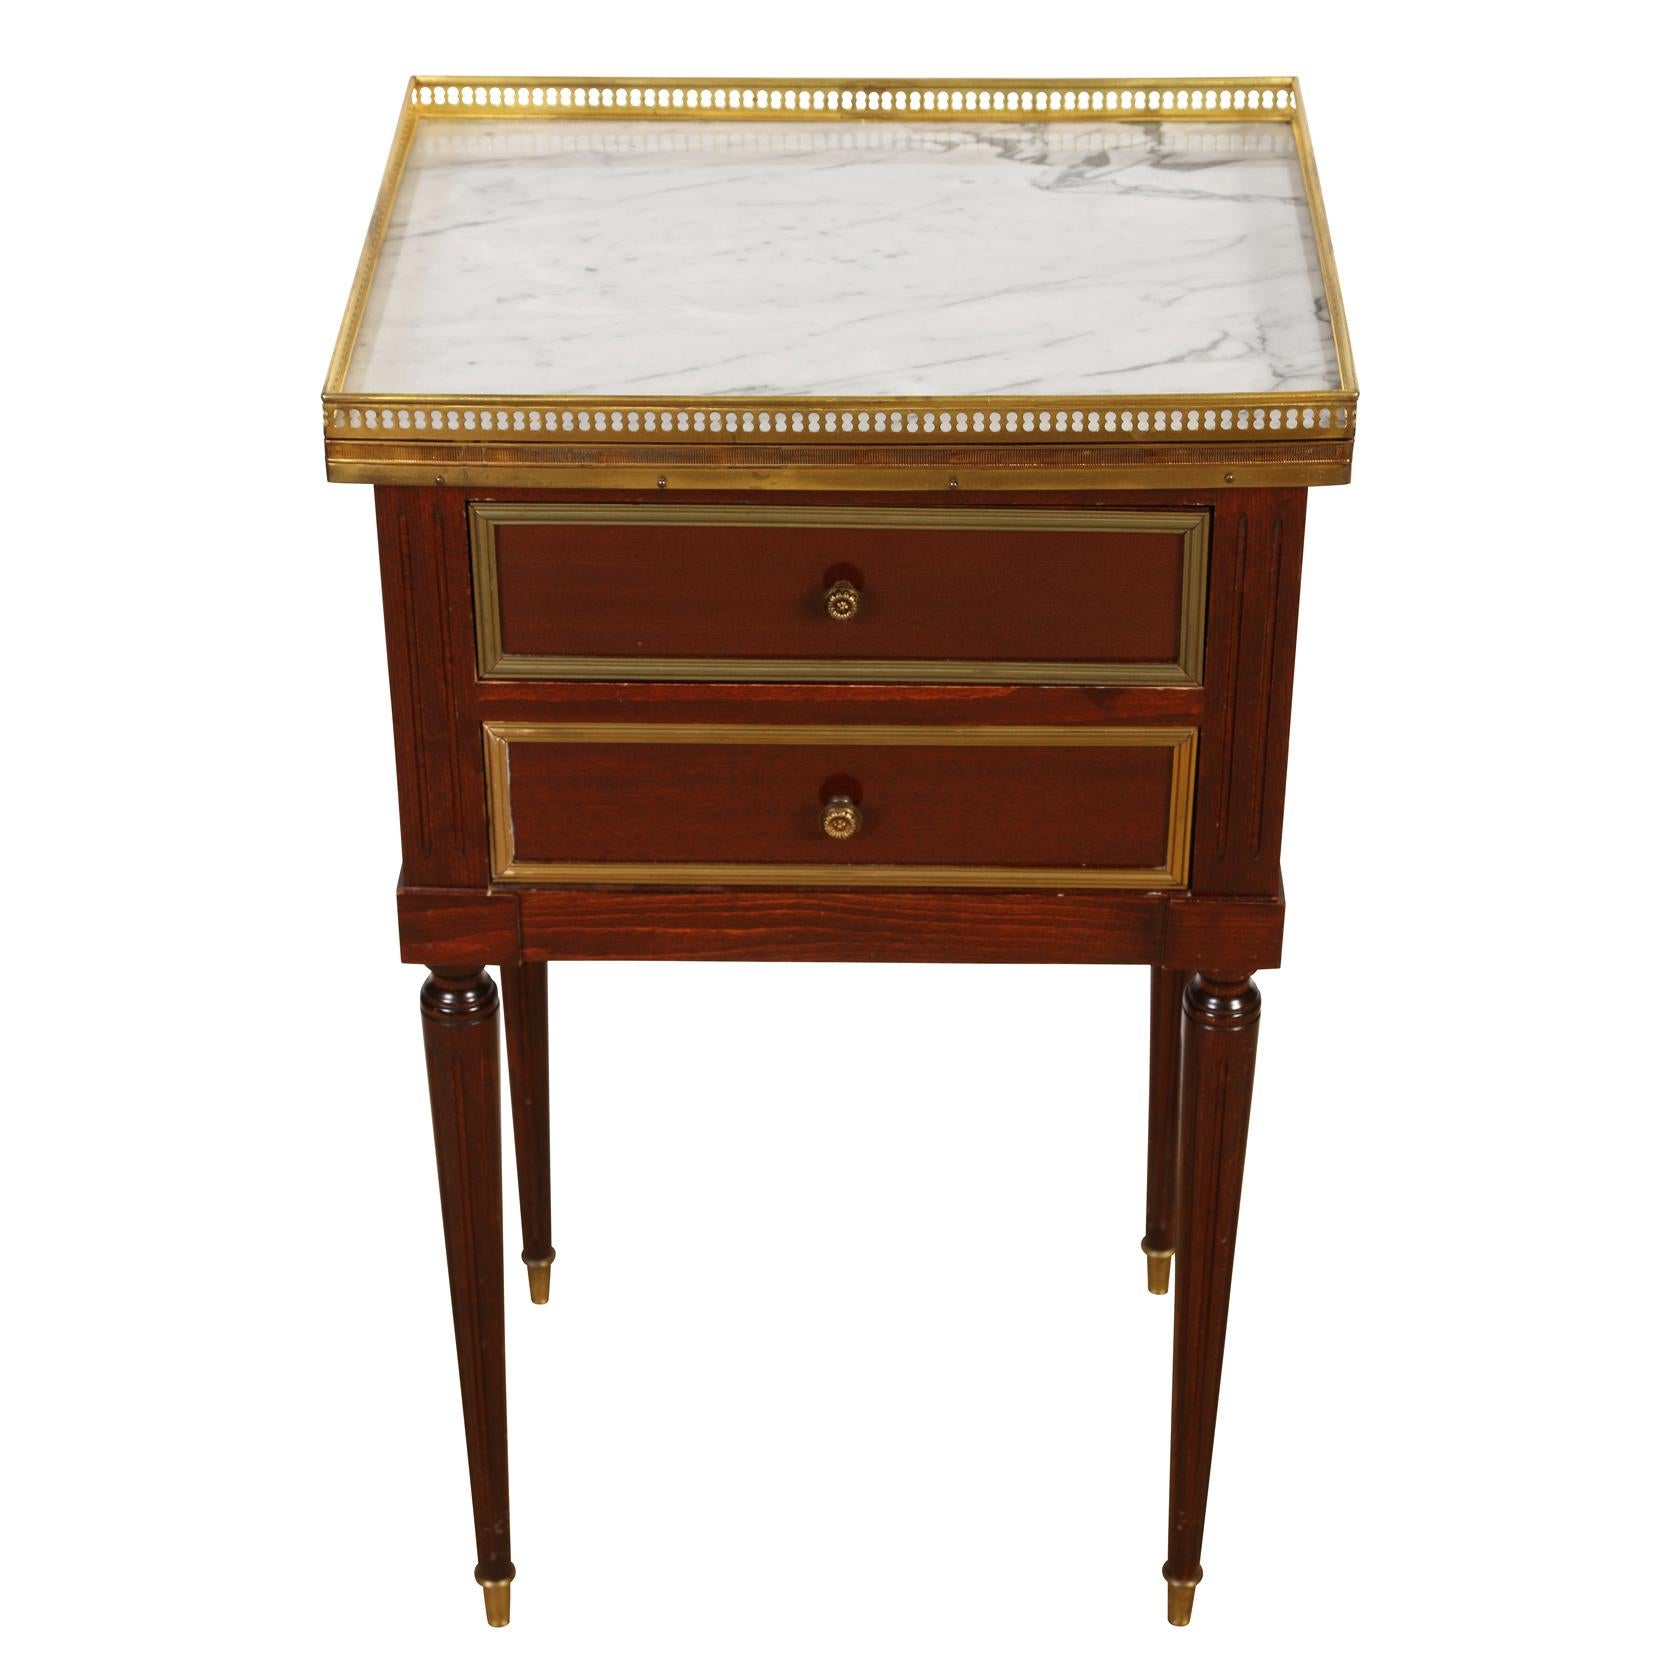 A pair of vintage traditional nightstands each with two drawers, a marble top with pierced brass gallery rail, brass trim on each drawer and reeded legs.